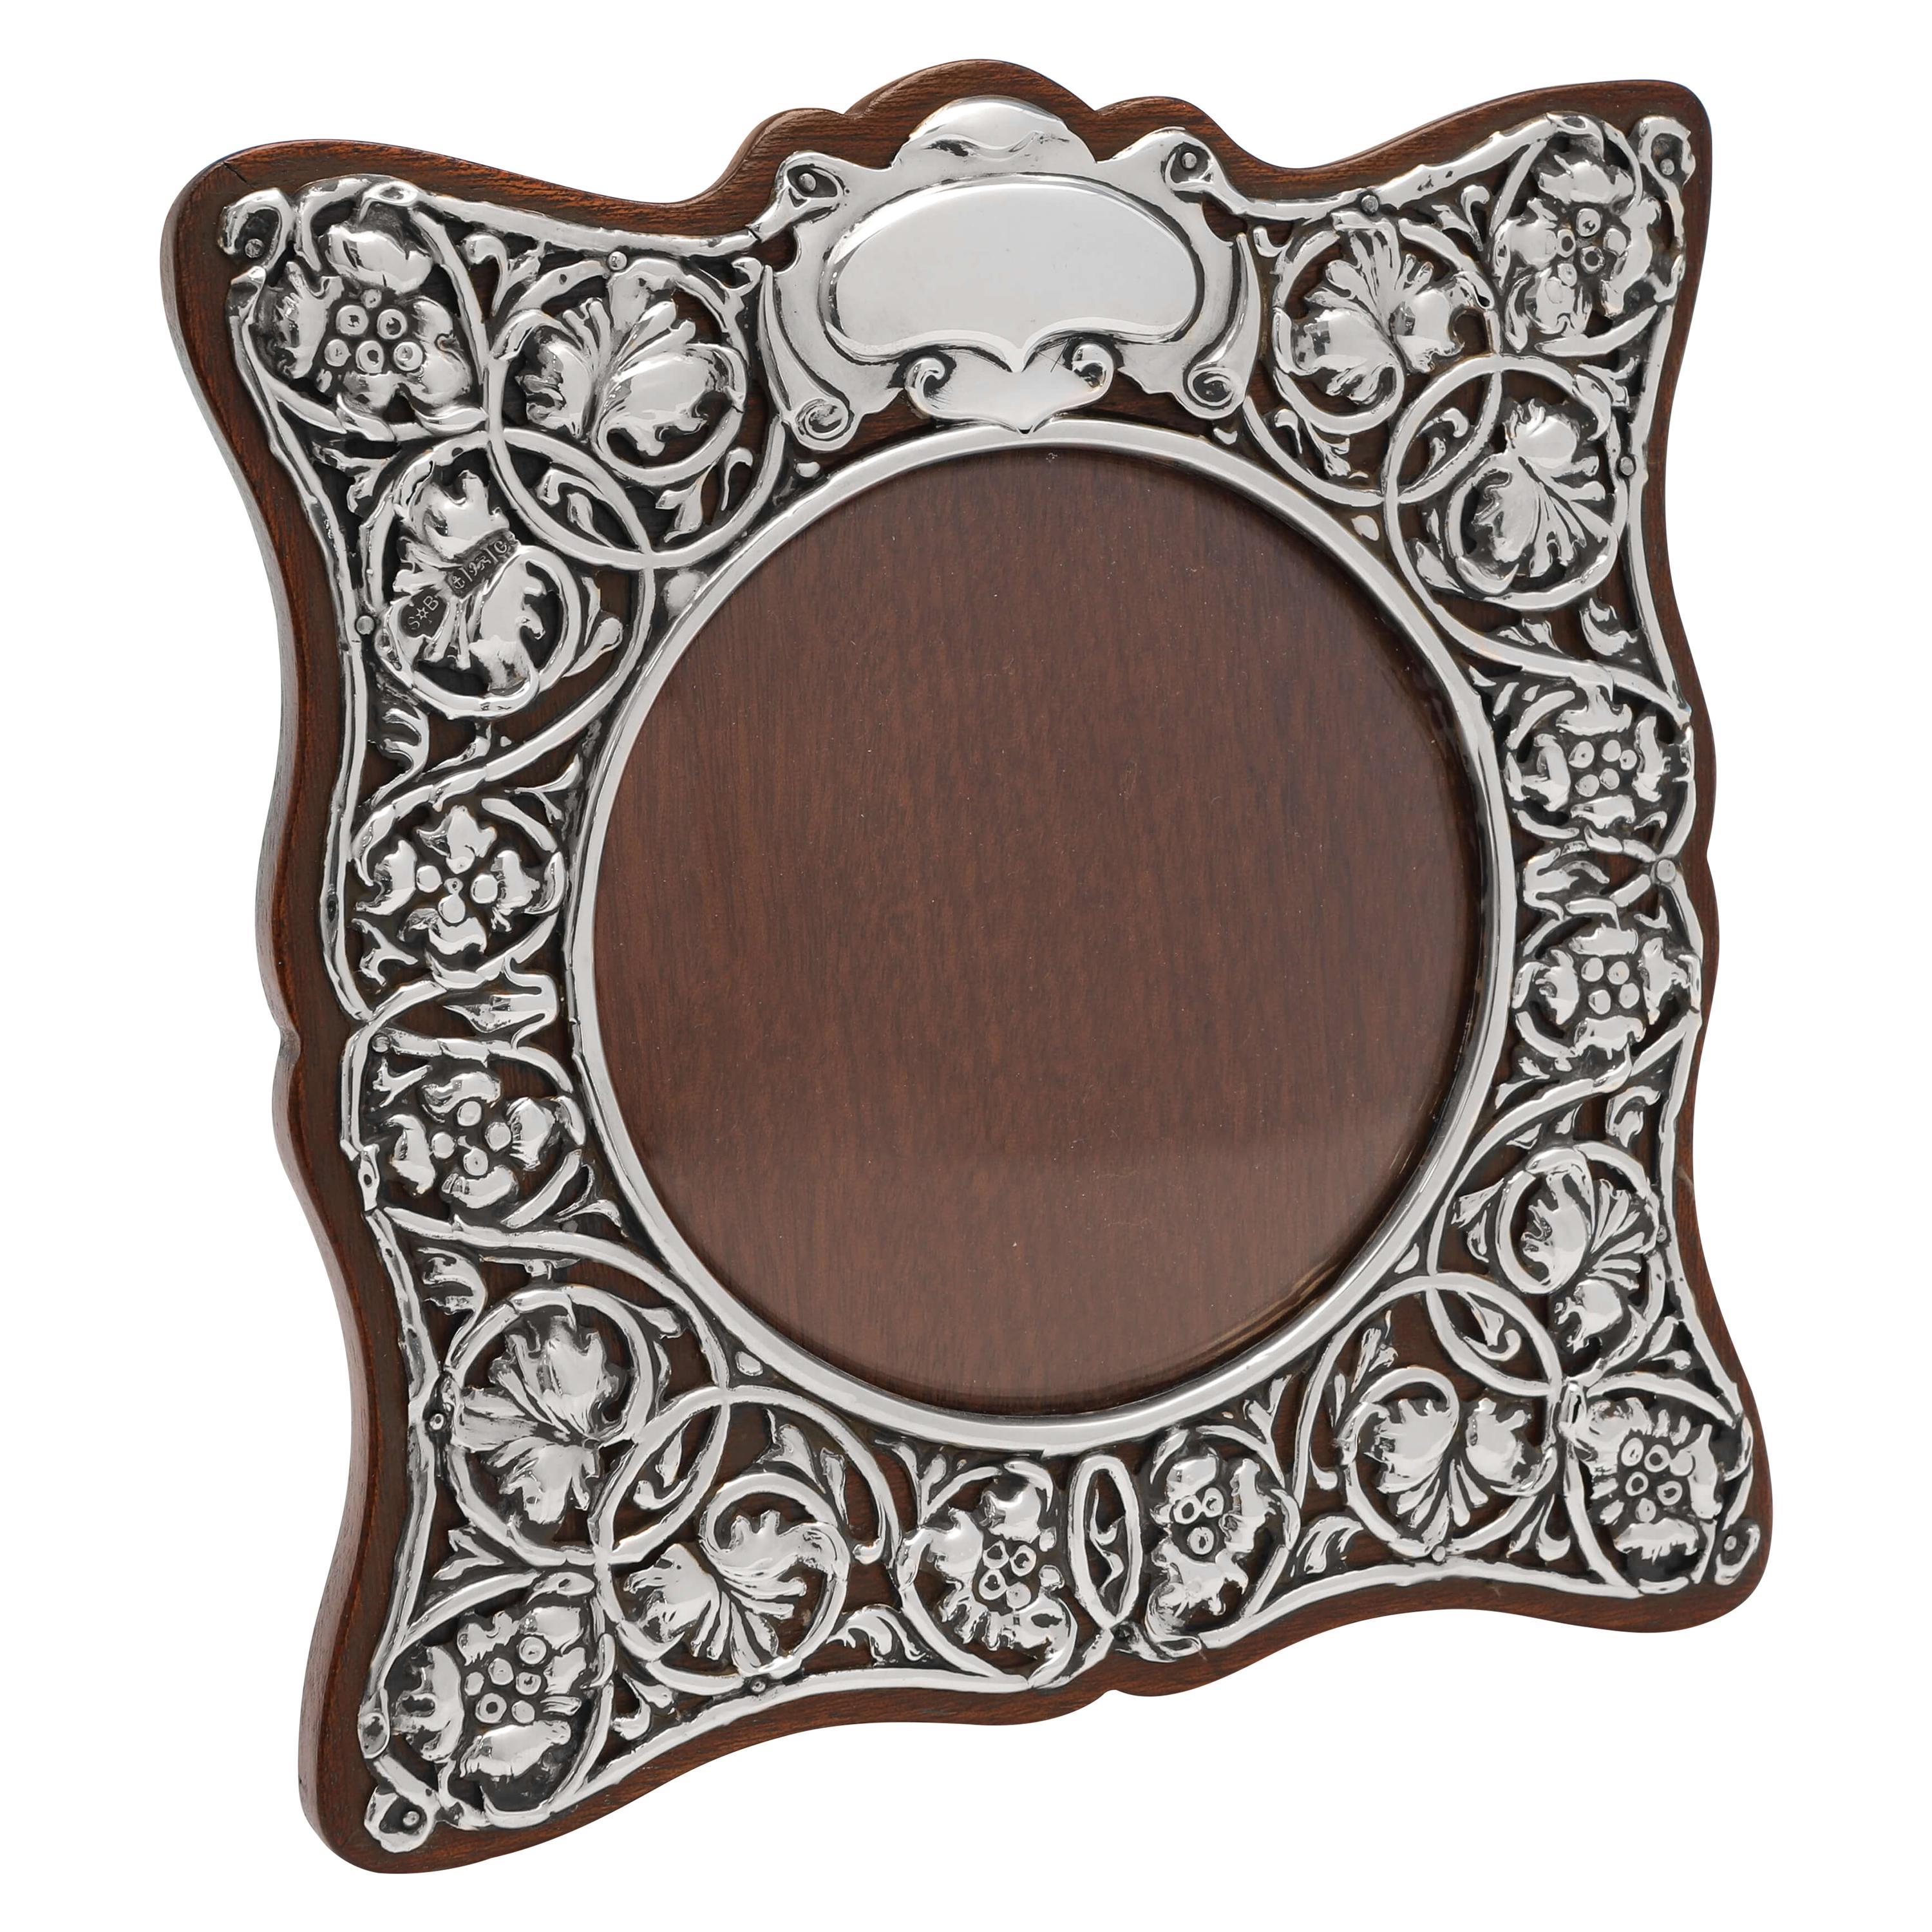 Attractive Art Nouveau Photograph Frame, Sterling Silver, Hallmarked in 1902